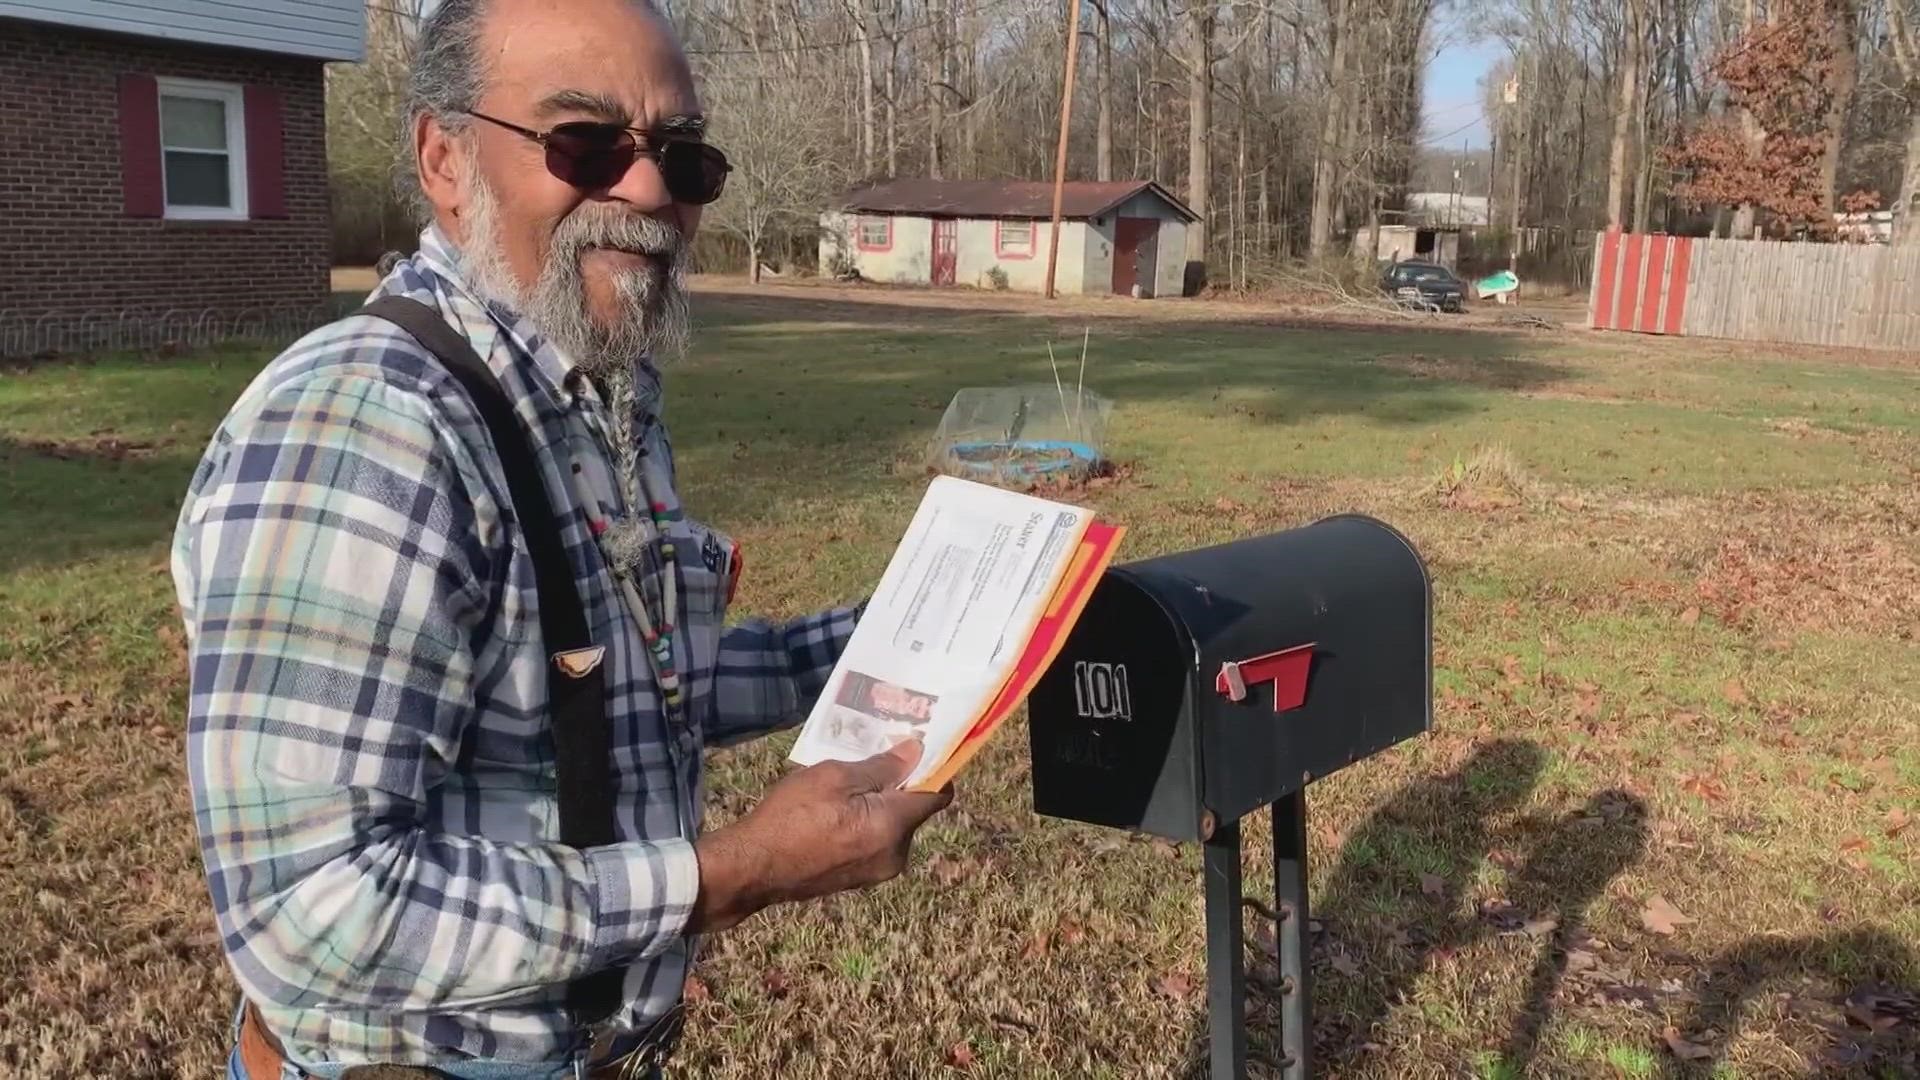 Melvin Evans is a disabled veteran and for months, he's had to cross a busy street to get his mail. Sometimes, his packages, which included medications, were ripped